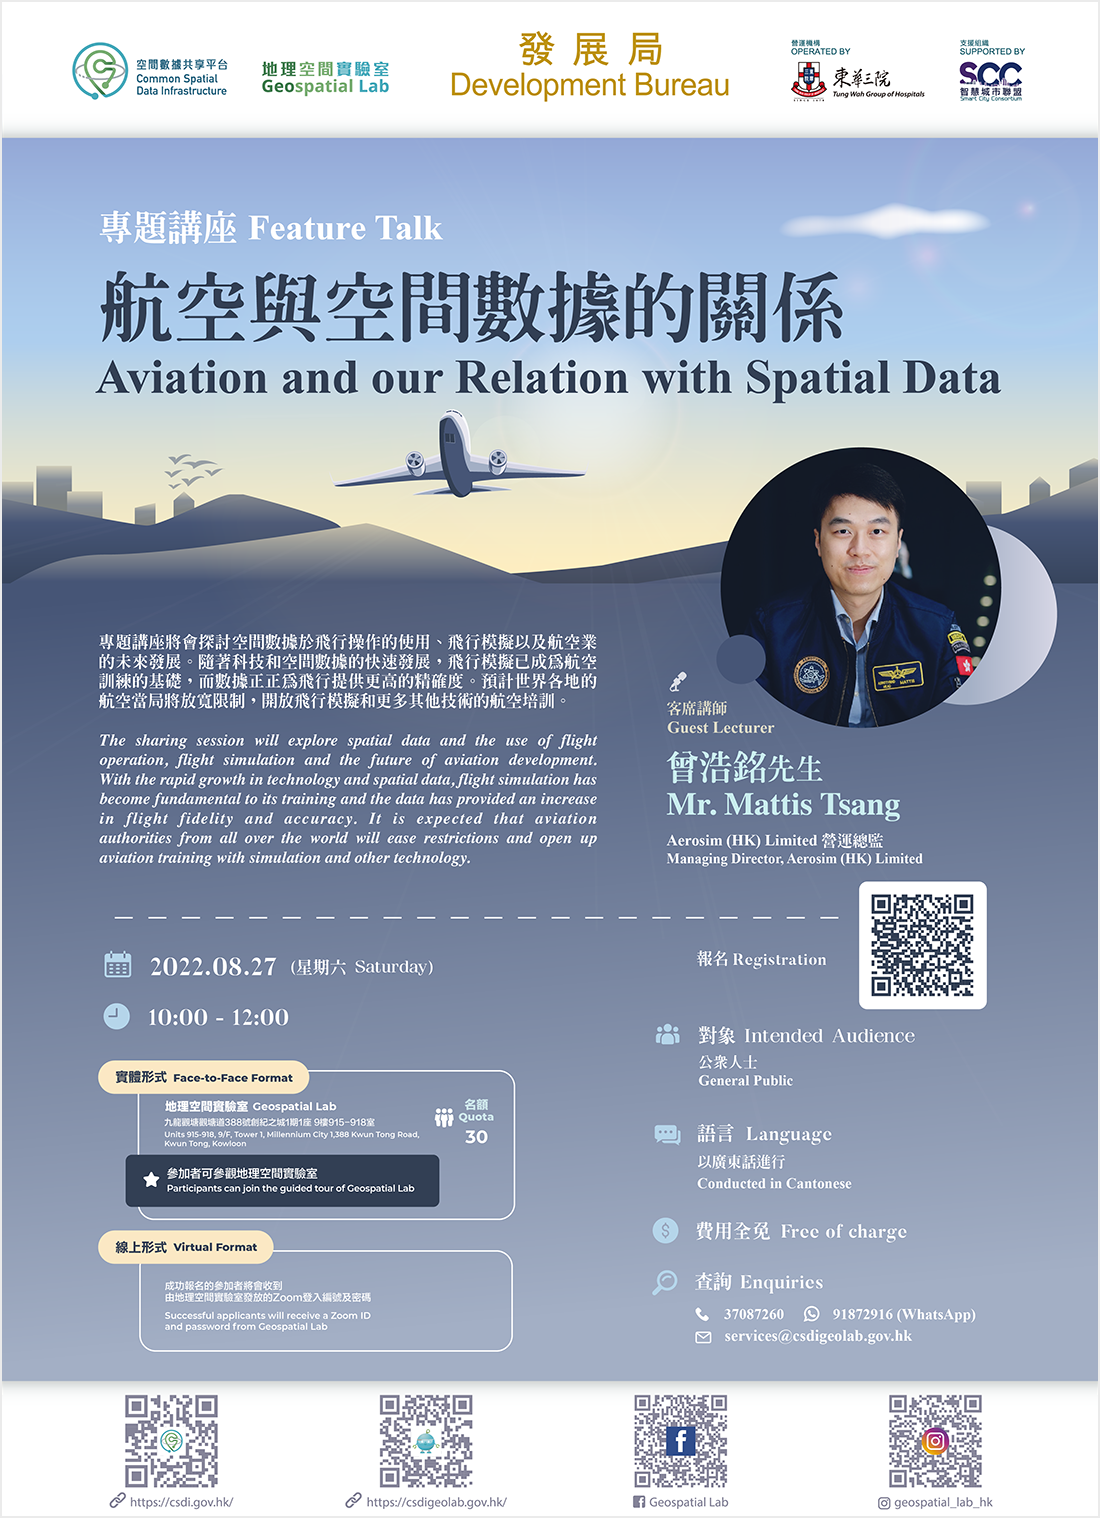 Poster of Feature Talk - Aviation and Our Relation with Spatial Data